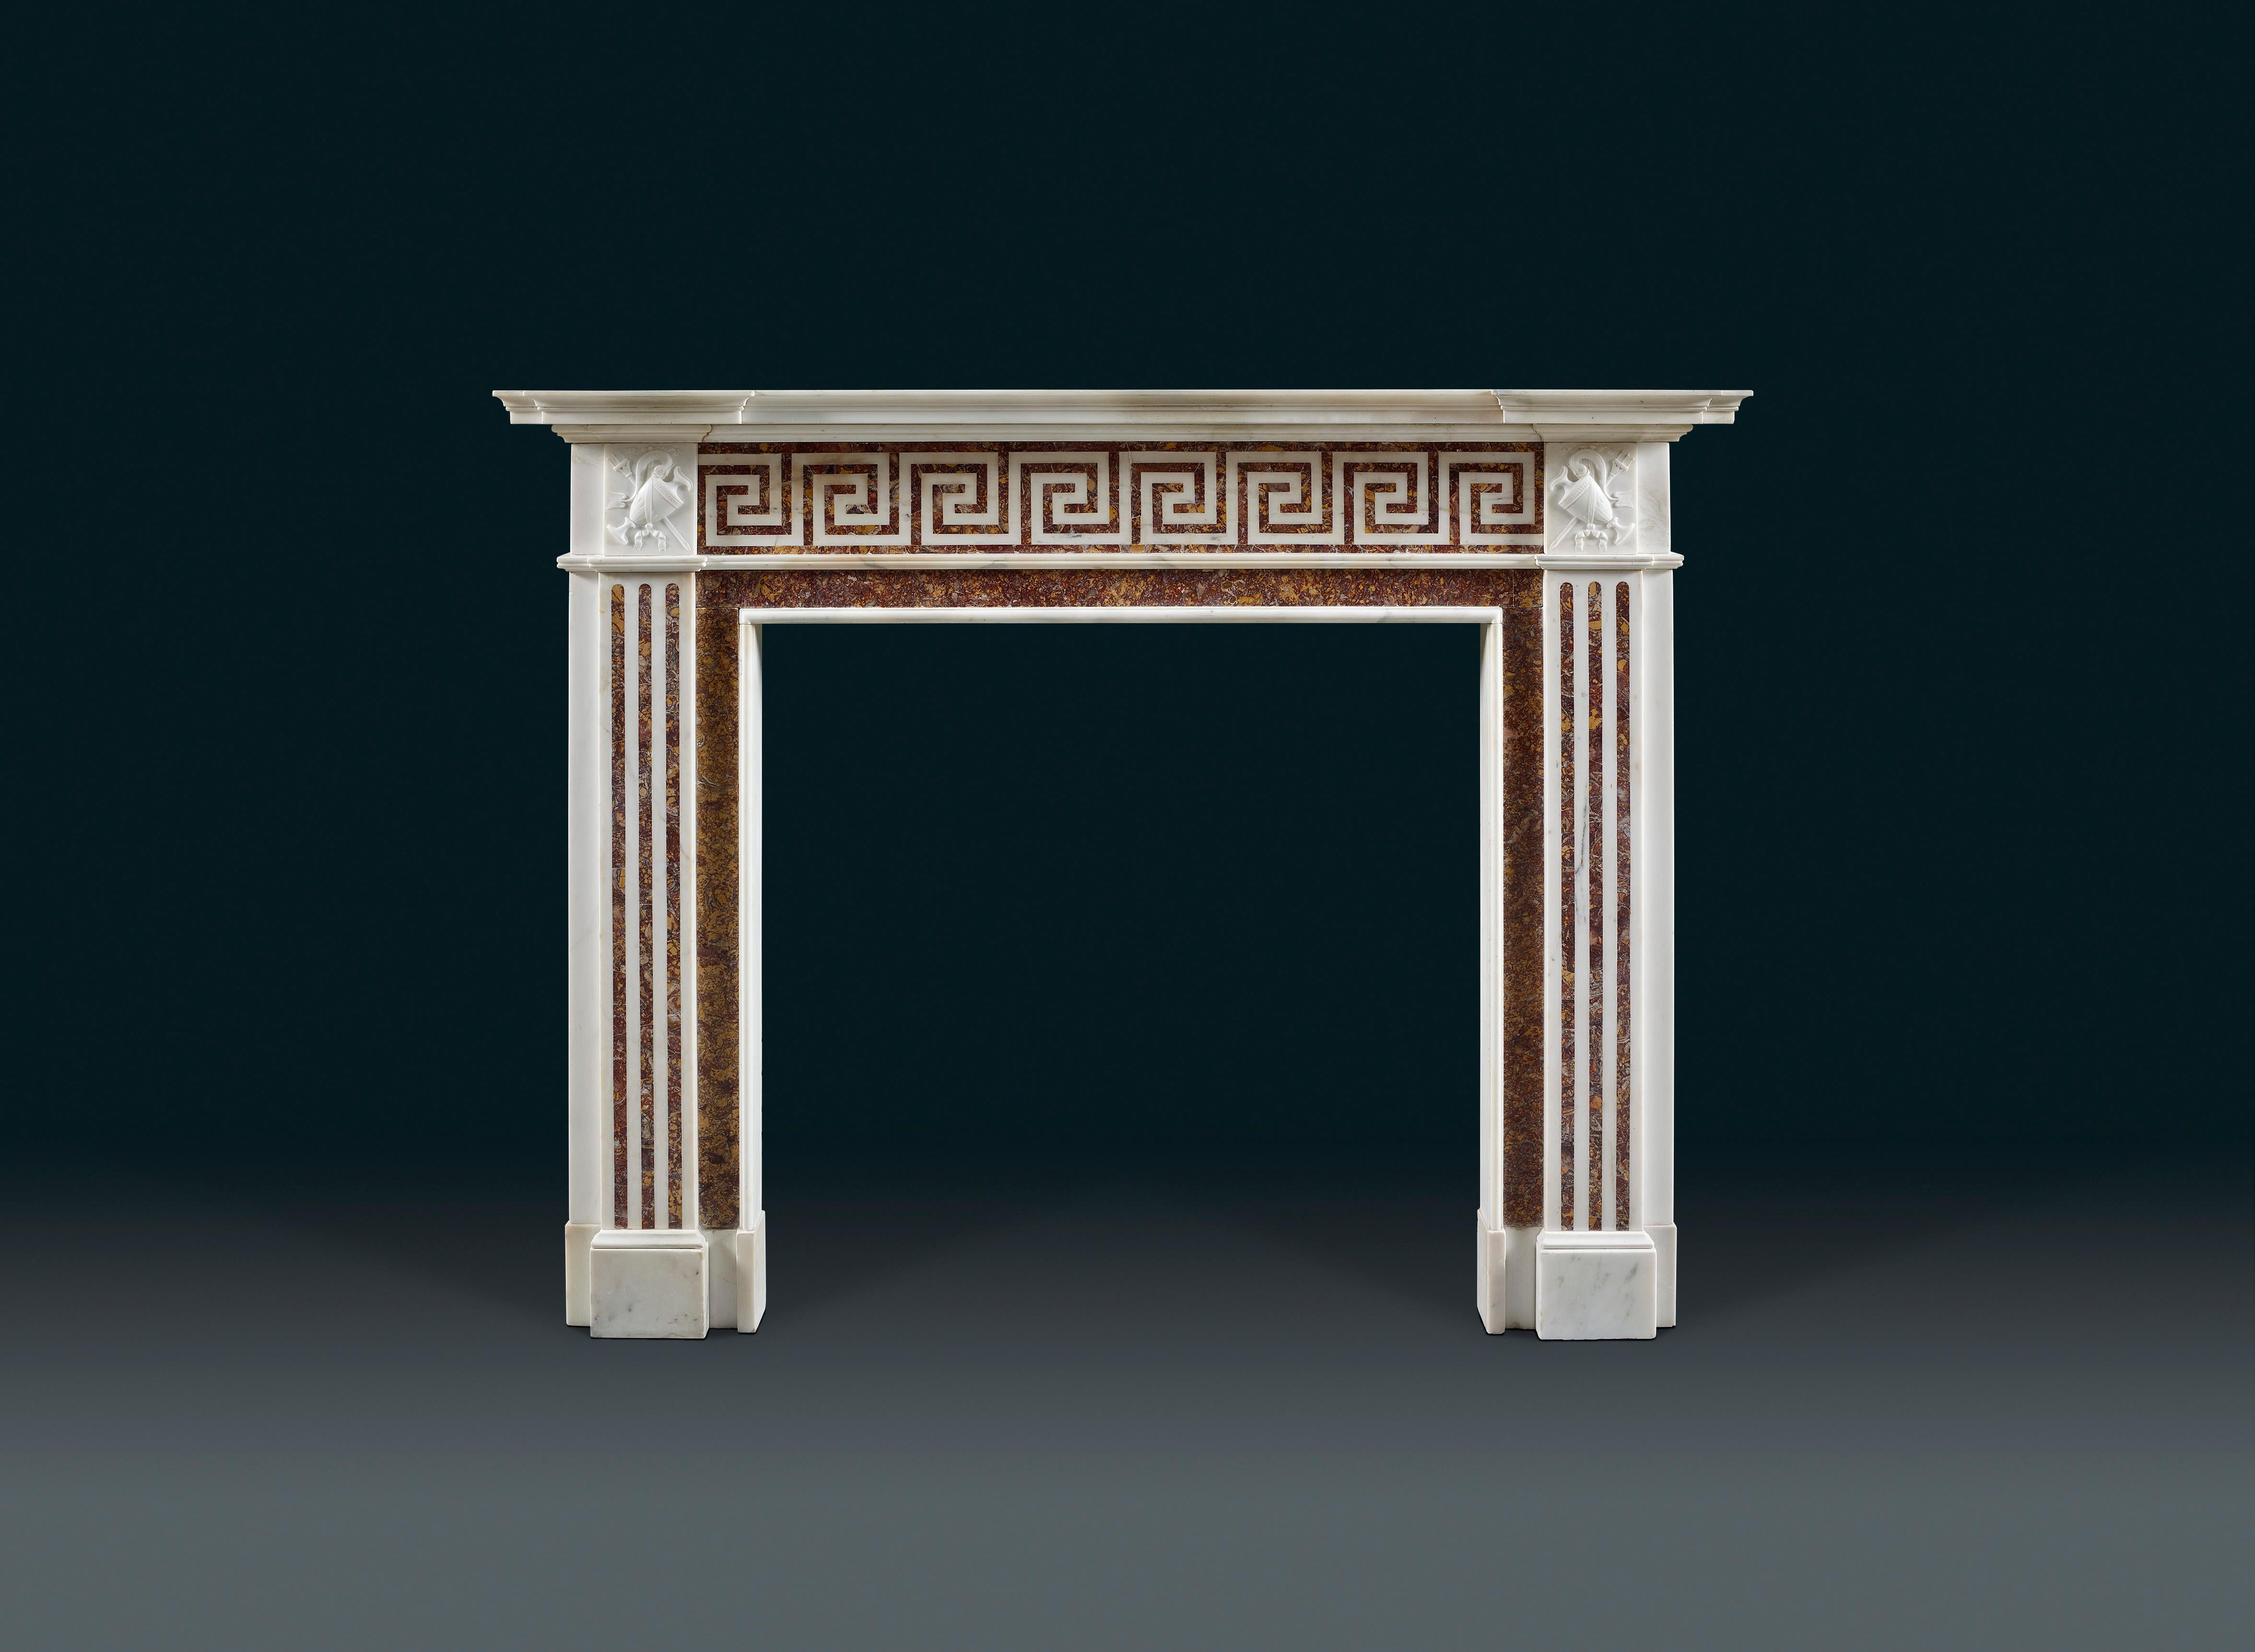 A 19th century English neoclassical chimneypiece of white statuary and colored Spanish Brocatello marbles. The tiered moulded shelf above the rectangular shaped frieze inlaid in white with a continuous double Greek key fret on a red and yellow